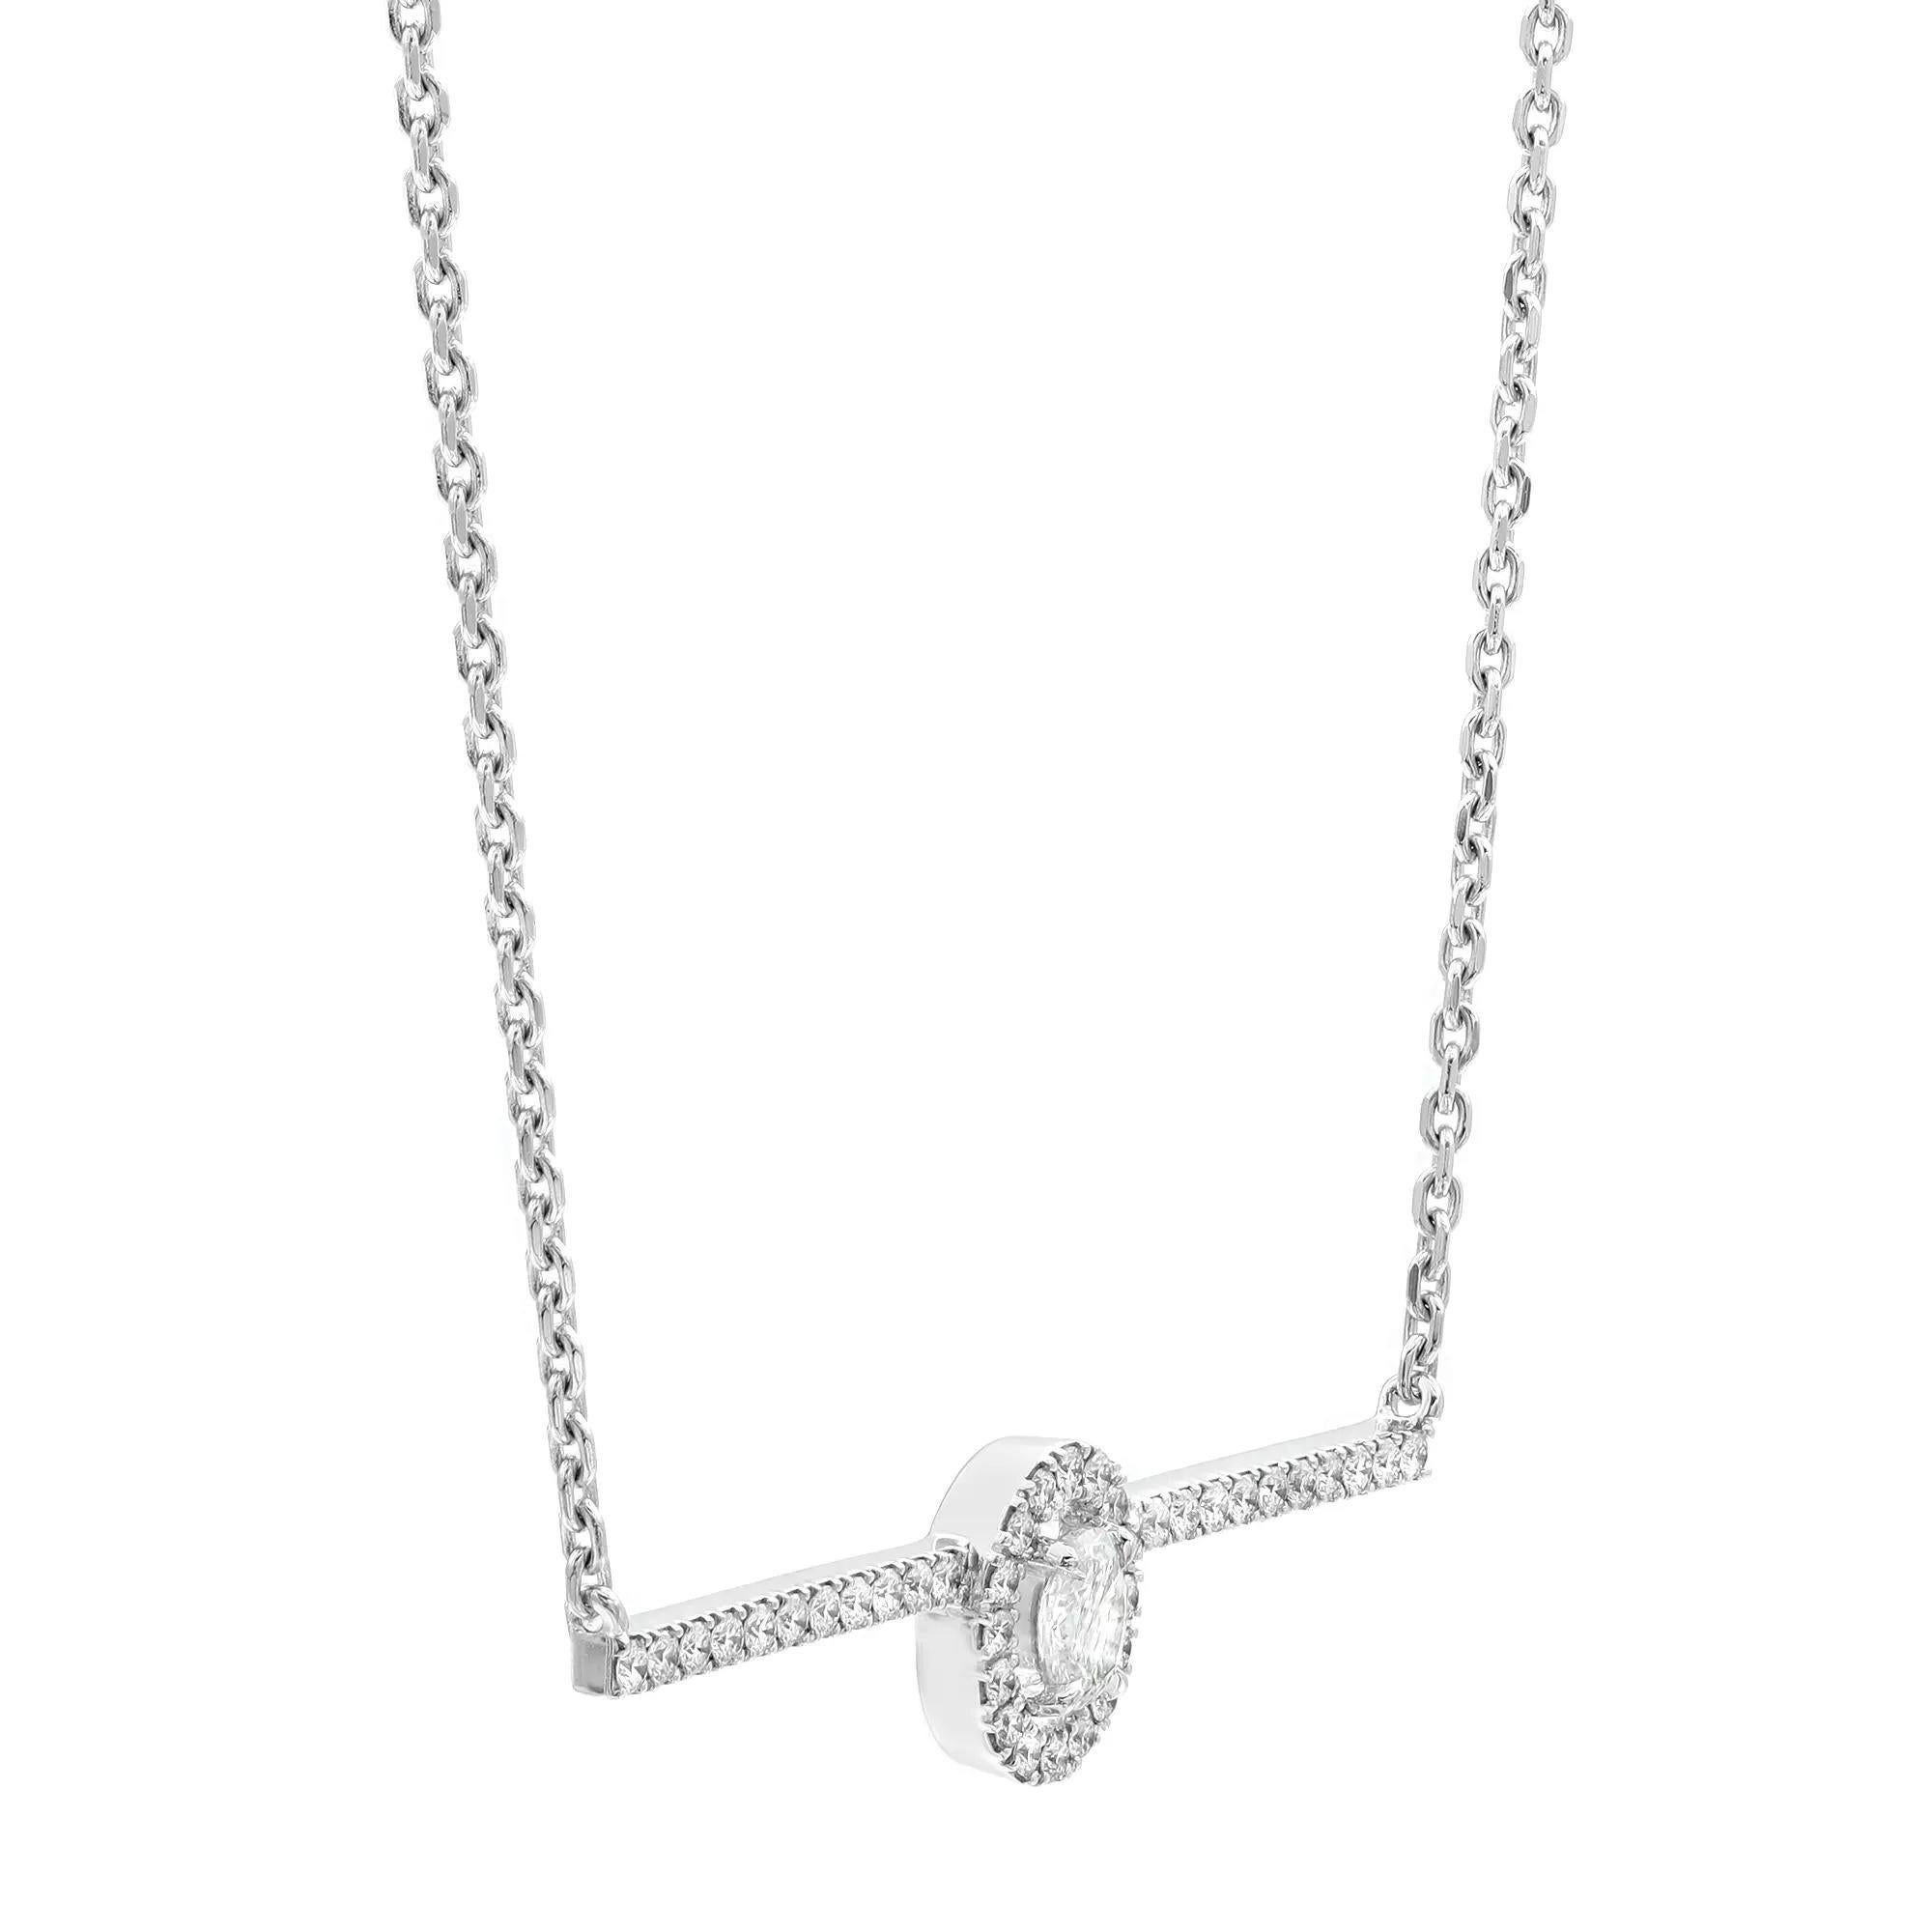 Taille ovale Messika 0.36Cttw Glam'Azone Diamond Chain Necklace 18K White Gold 18.5 Inches  en vente